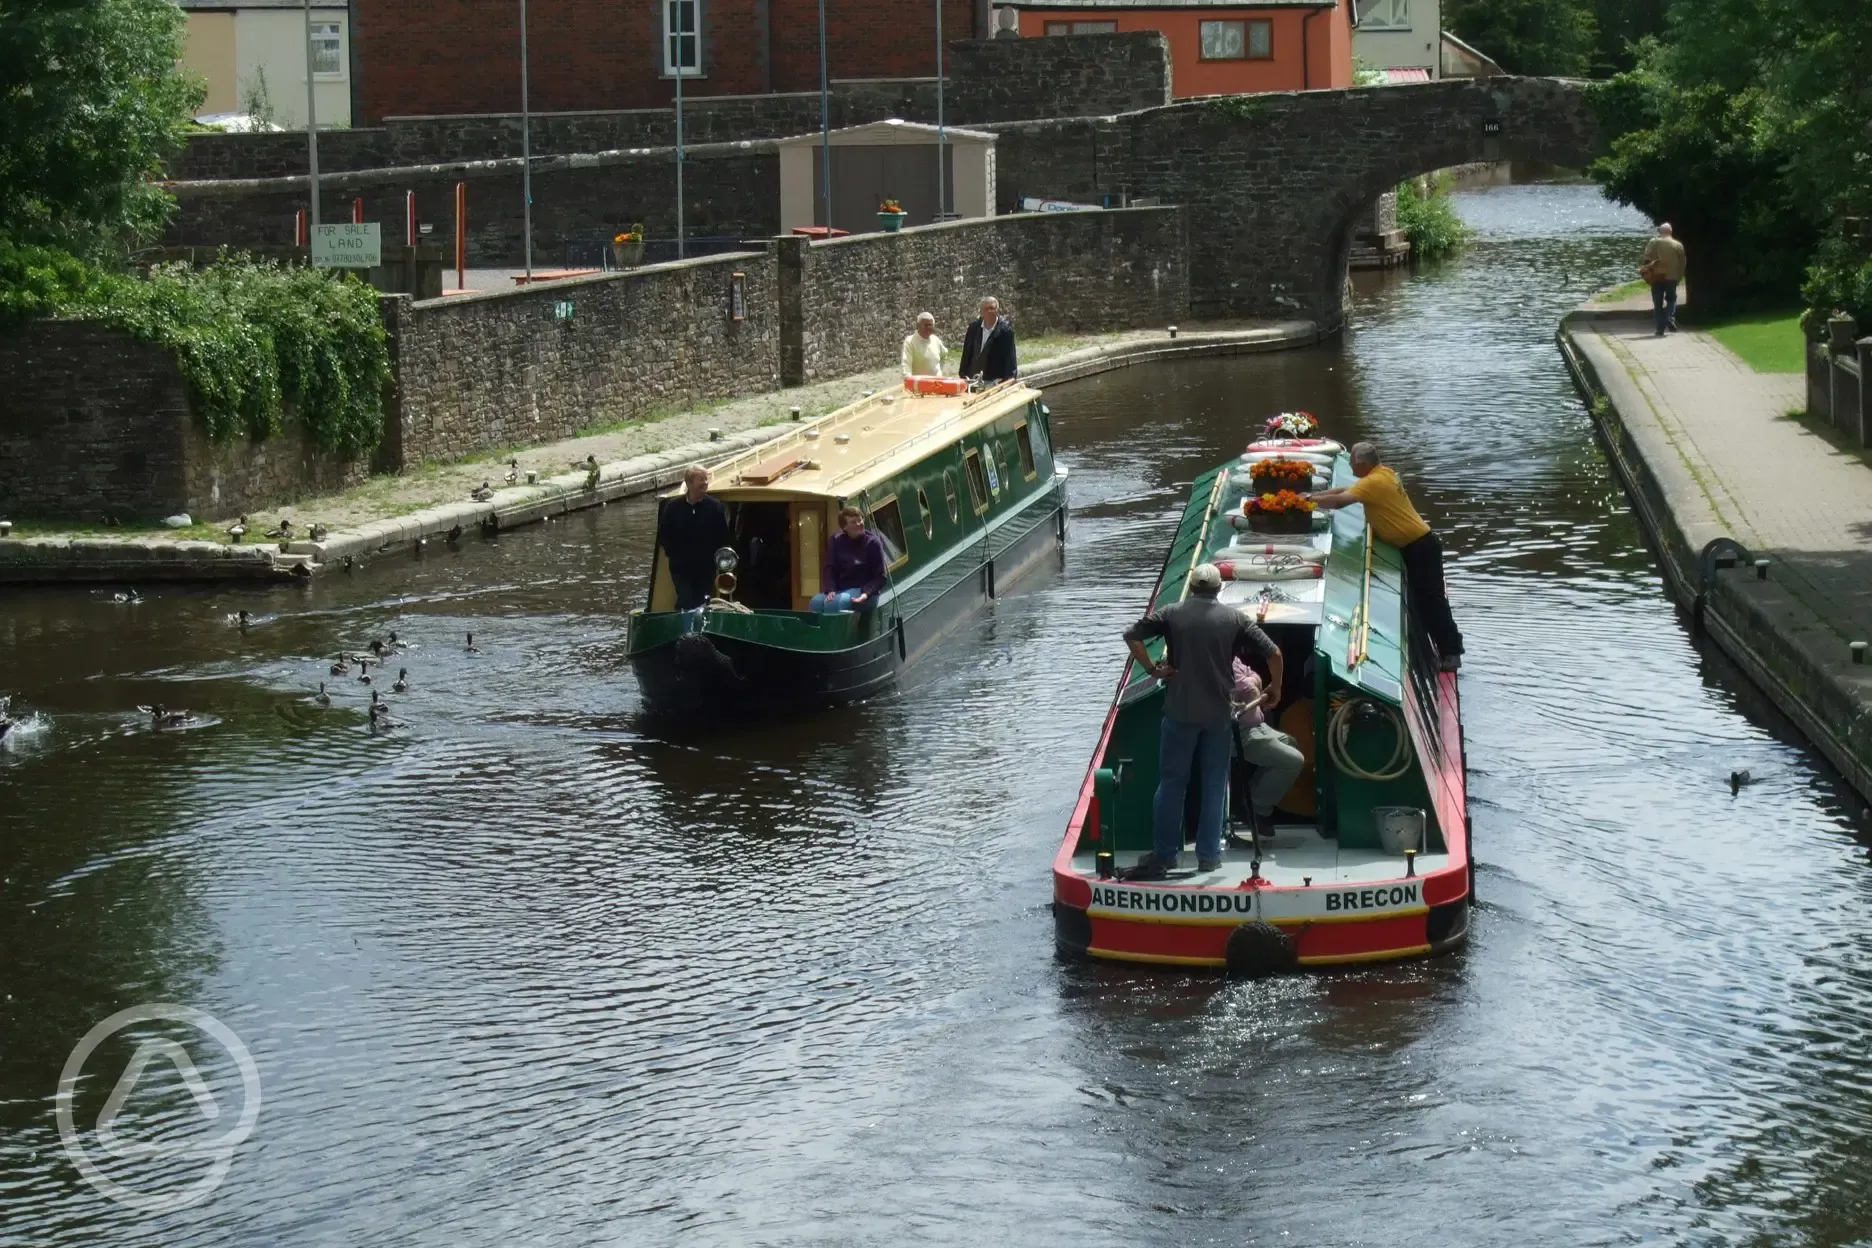 Nearby Monmouth and Brecon Canal